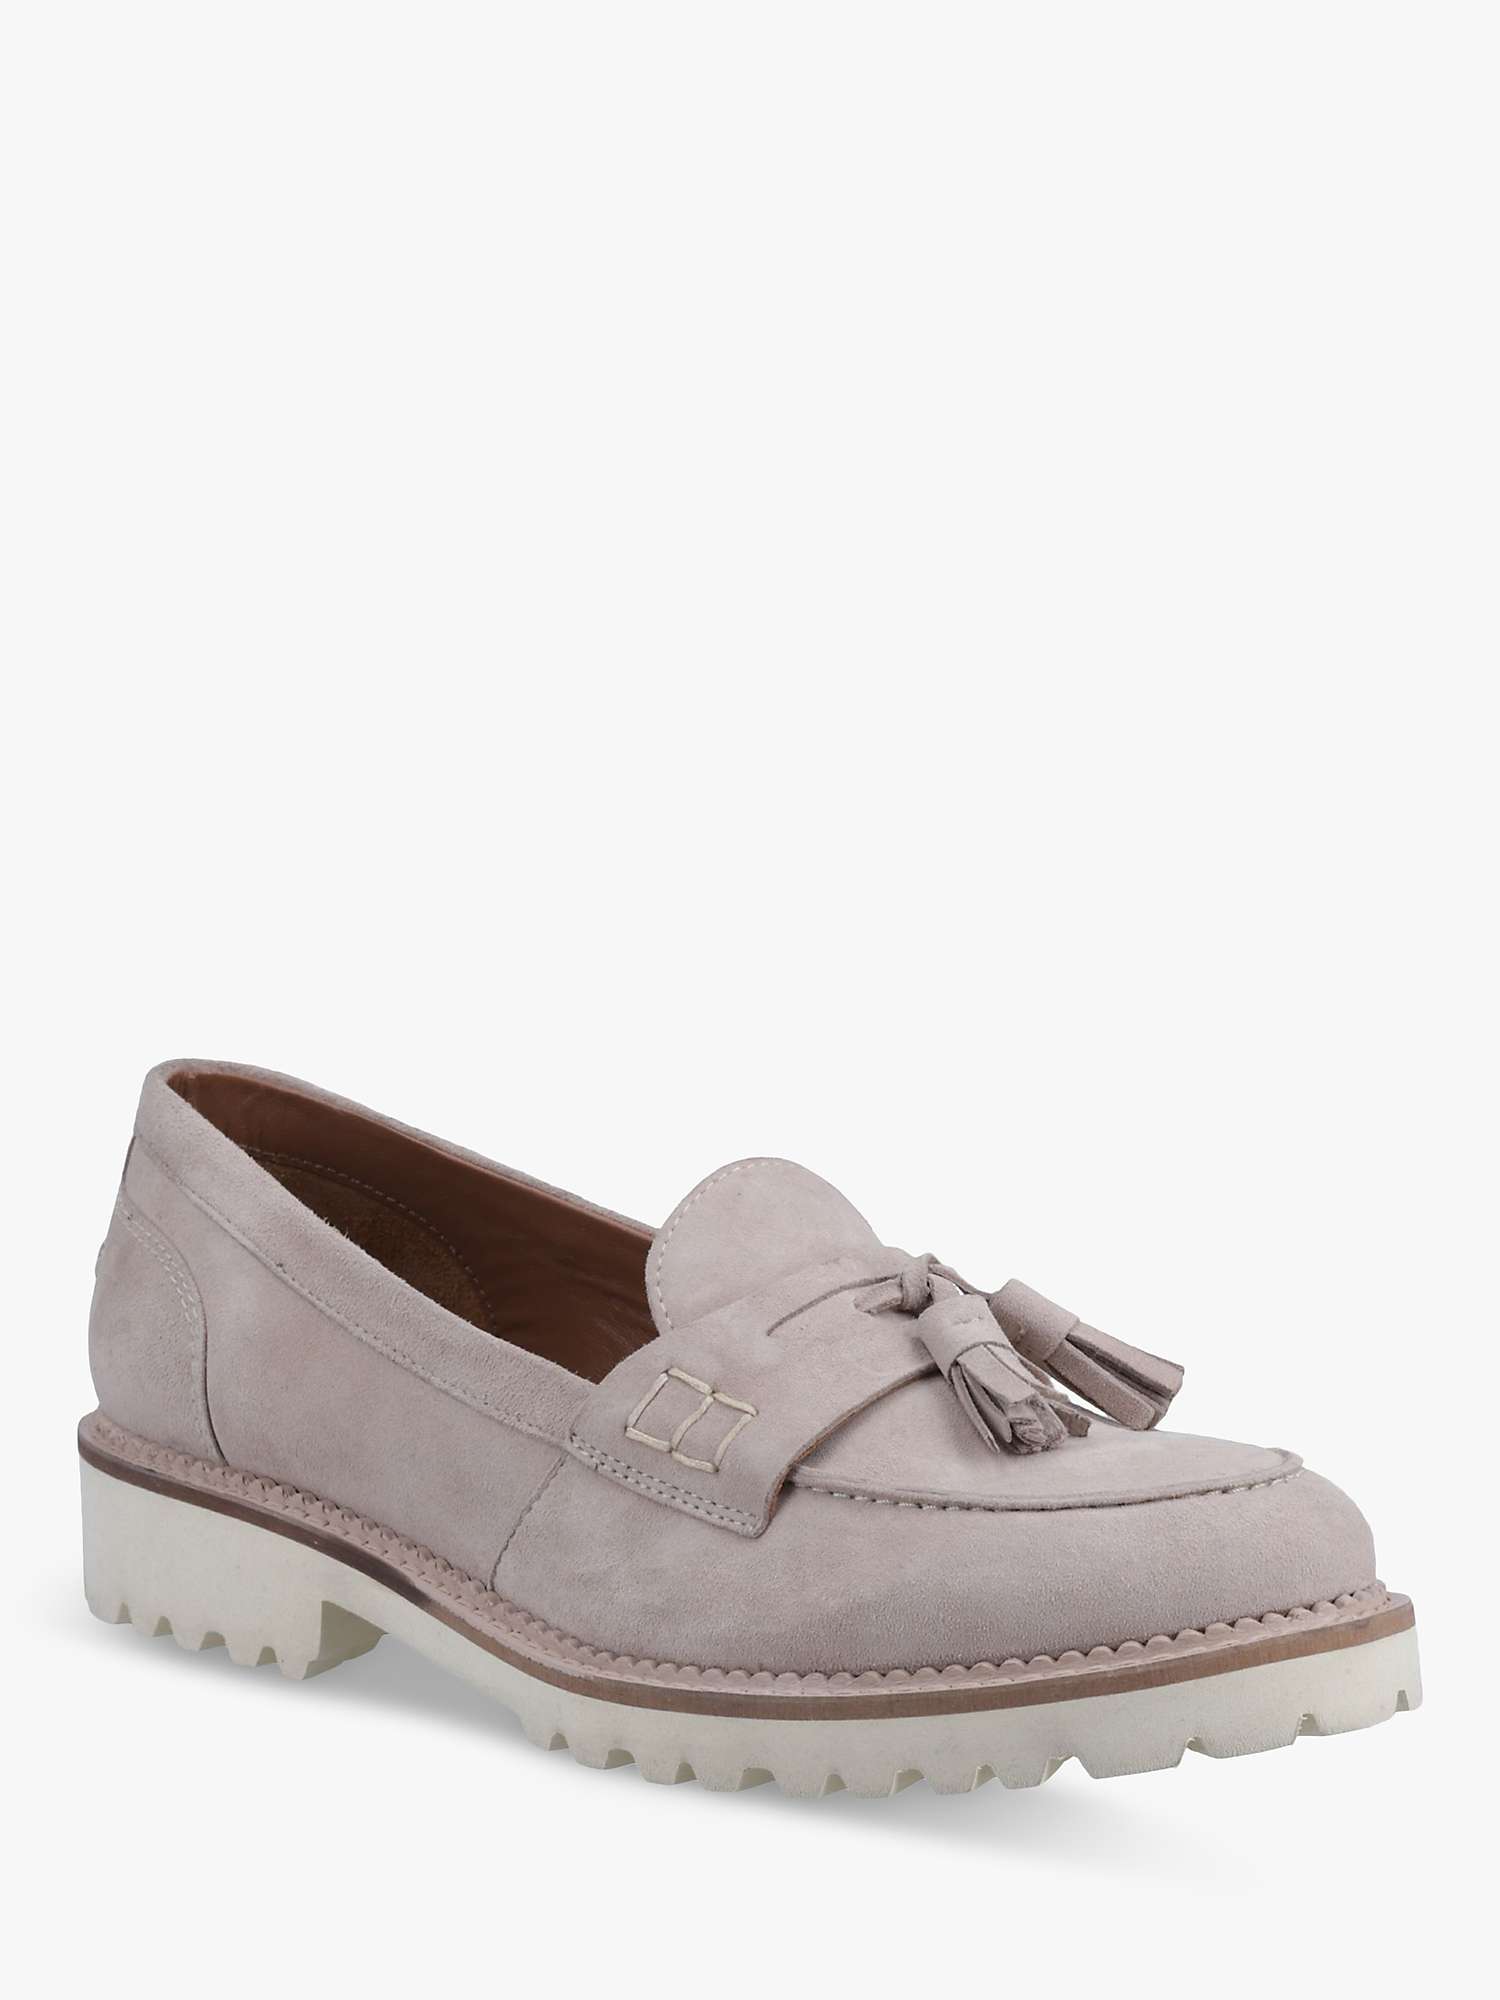 Buy Hush Puppies Ginny Block Heel Suede Loafers, Taupe Online at johnlewis.com